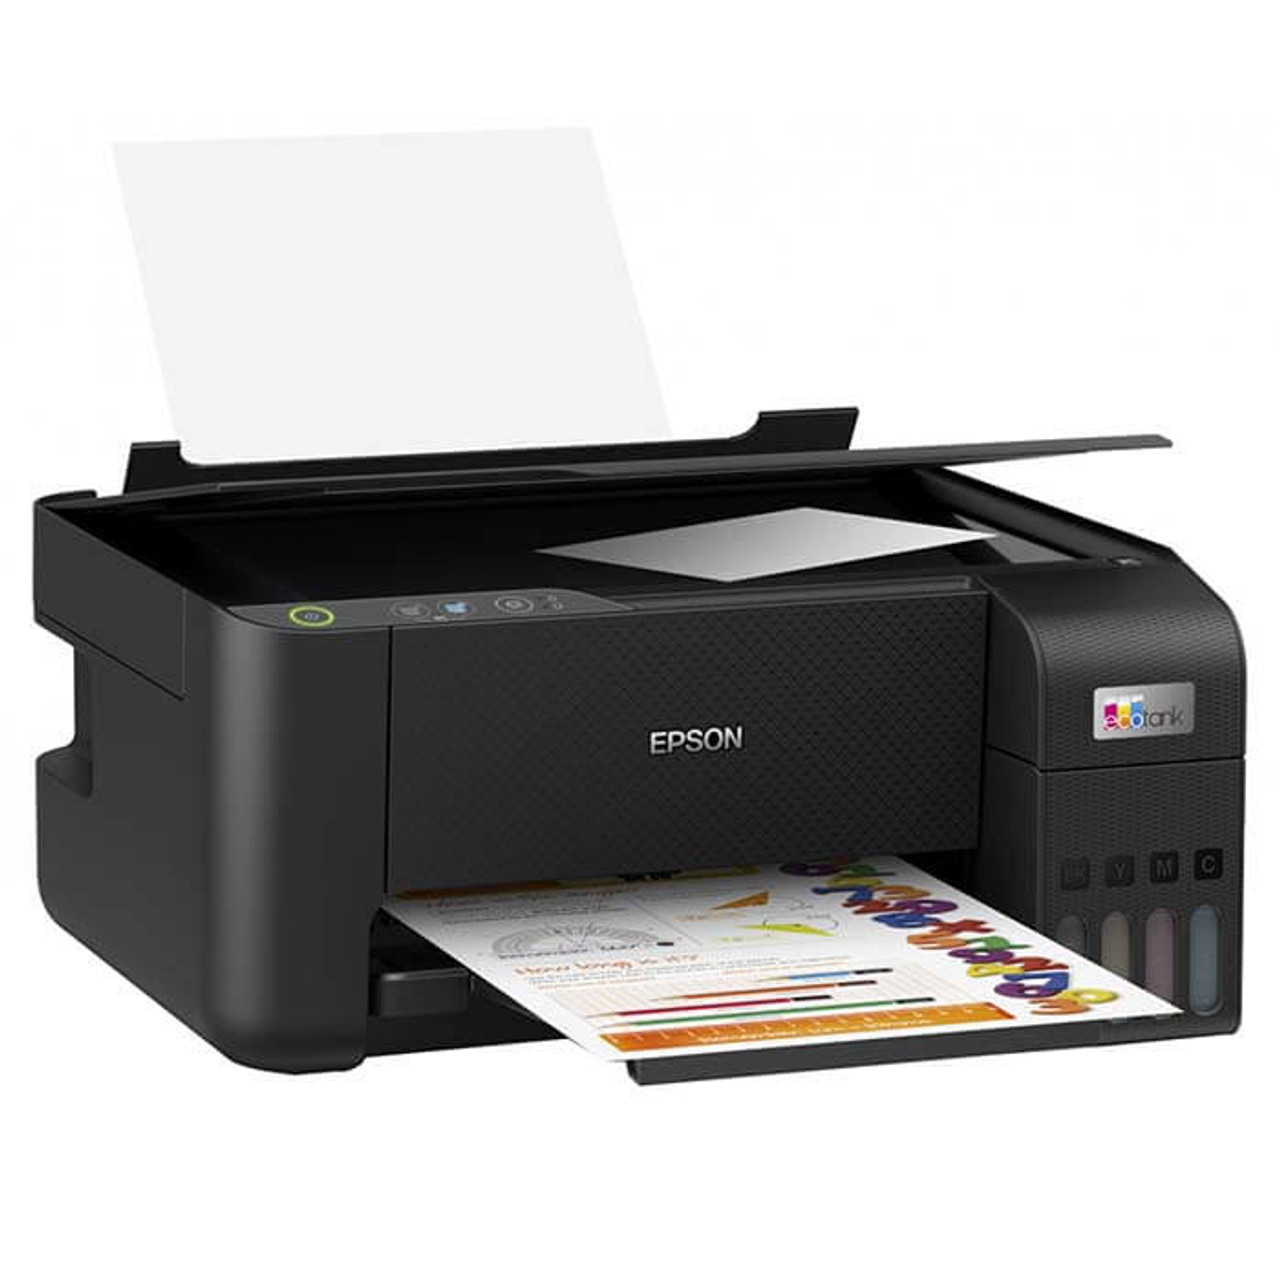 COMPUTER PRINTER EPSON L3210 ECOTANK ALL-IN-ONE INK TANK - A. Ally & Sons